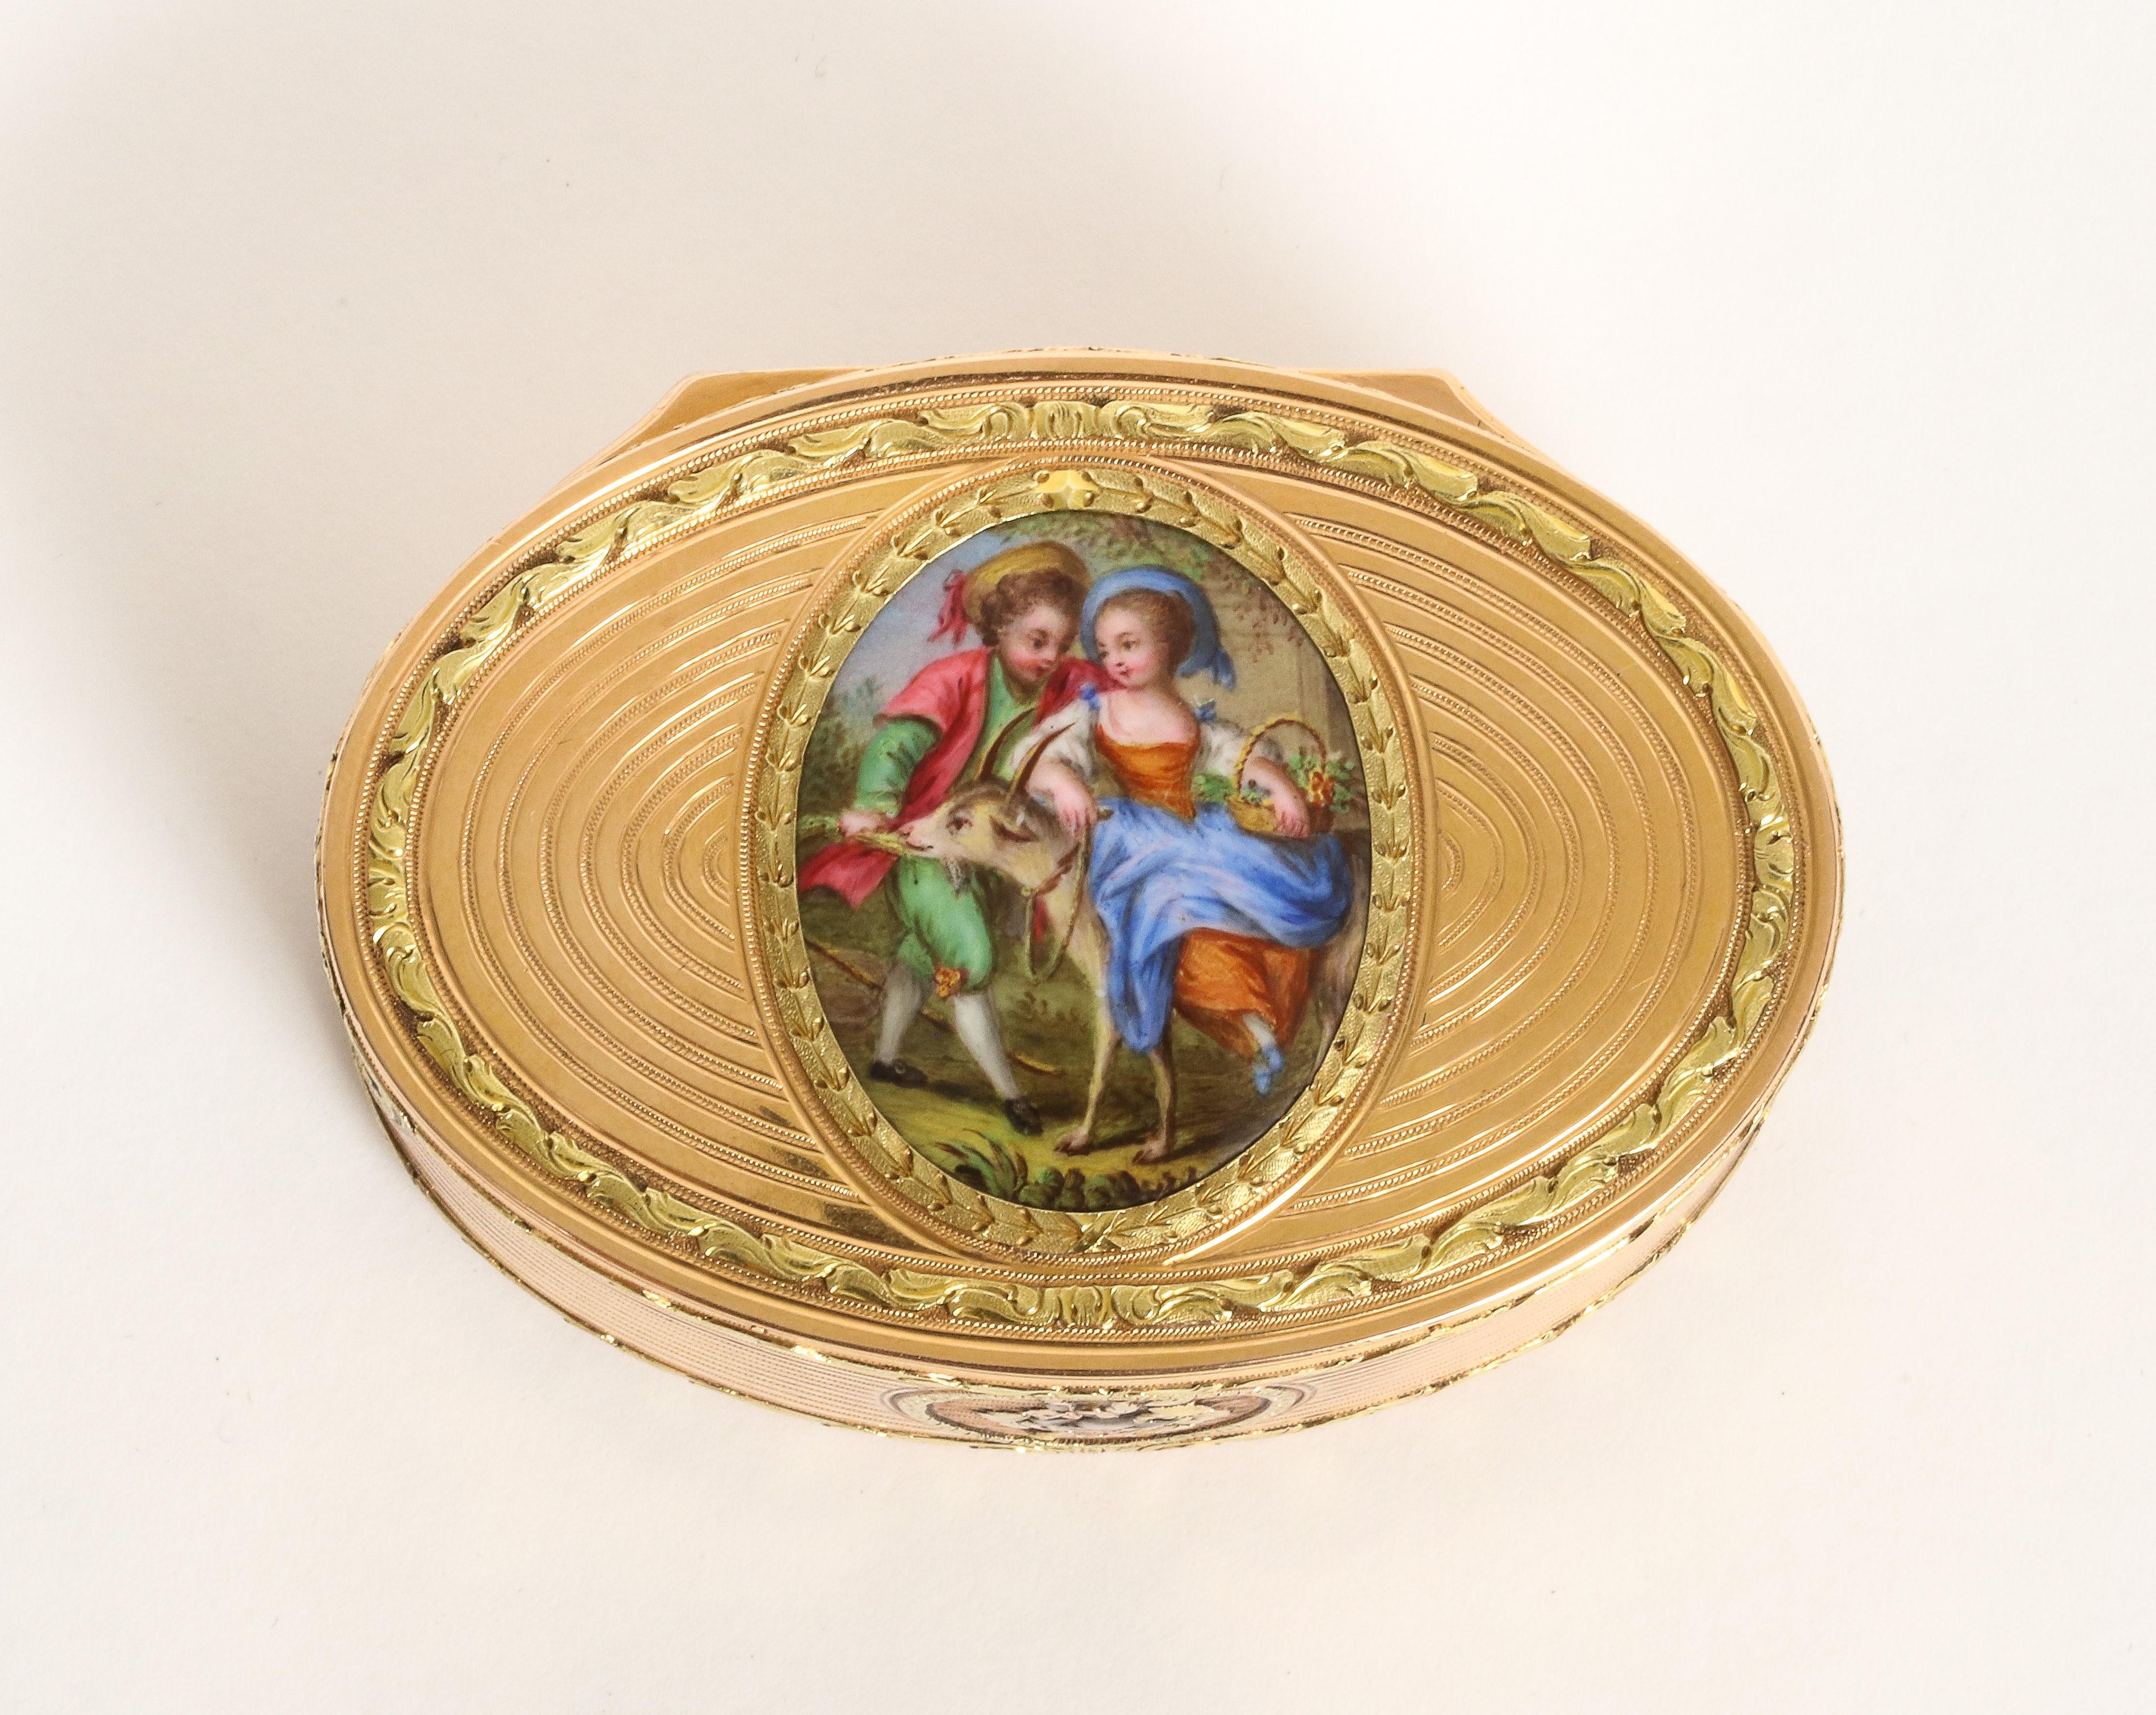 Three-tone gold oval enamel snuff box with with repoussé gold work of musical instruments
Enamel plaque center
Circa late 18th century - early 19th century, Switzerland
Weight: 76.5g
Dimensions: Approximately length: 2.59 in, width: 1.81 in,